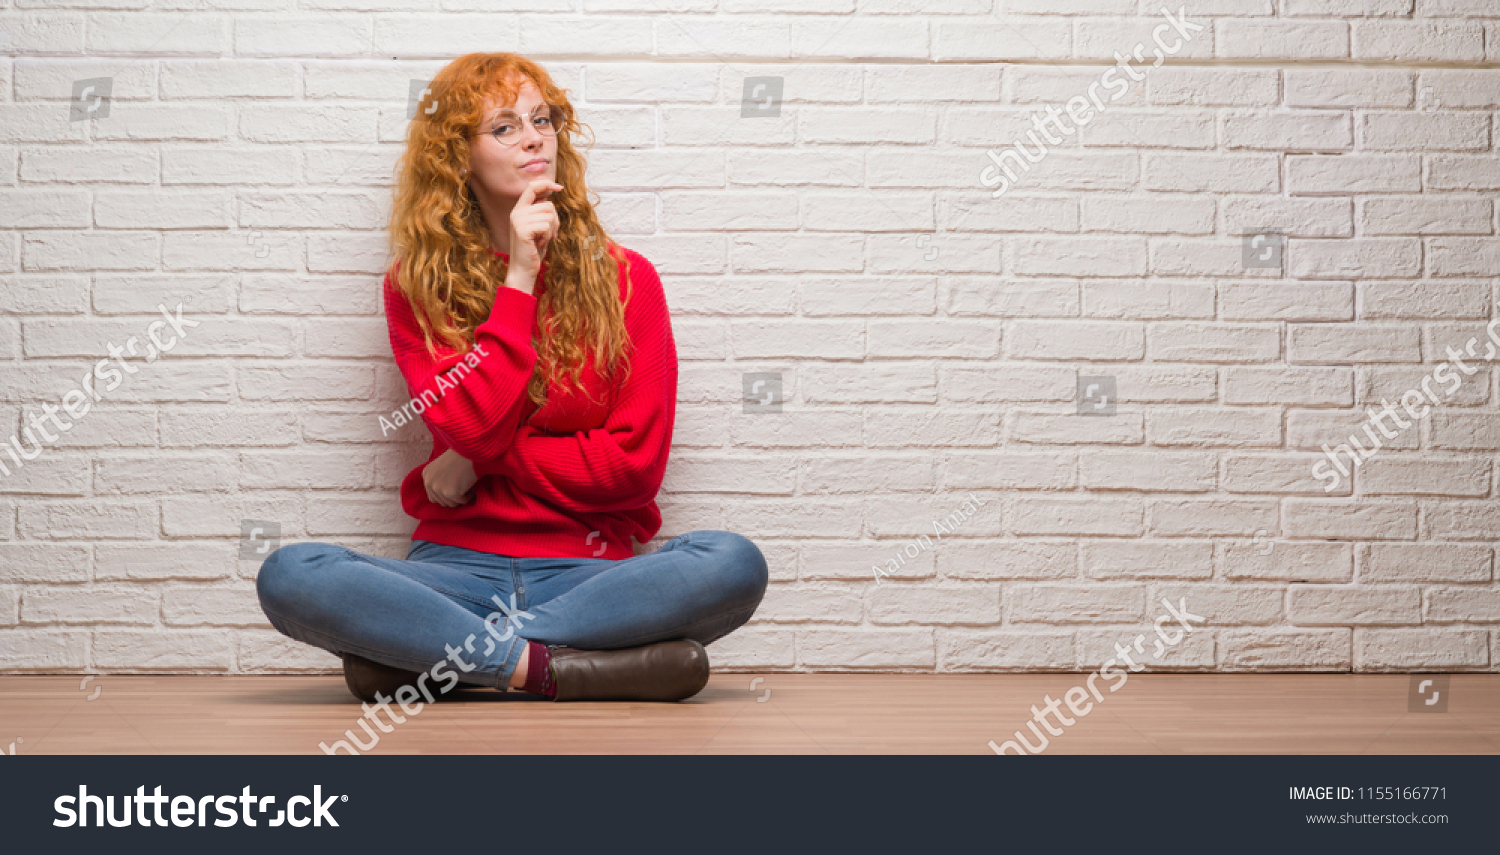 Young Redhead Woman Sitting Over Brick Foto Stock 1155166771 Shutterstock